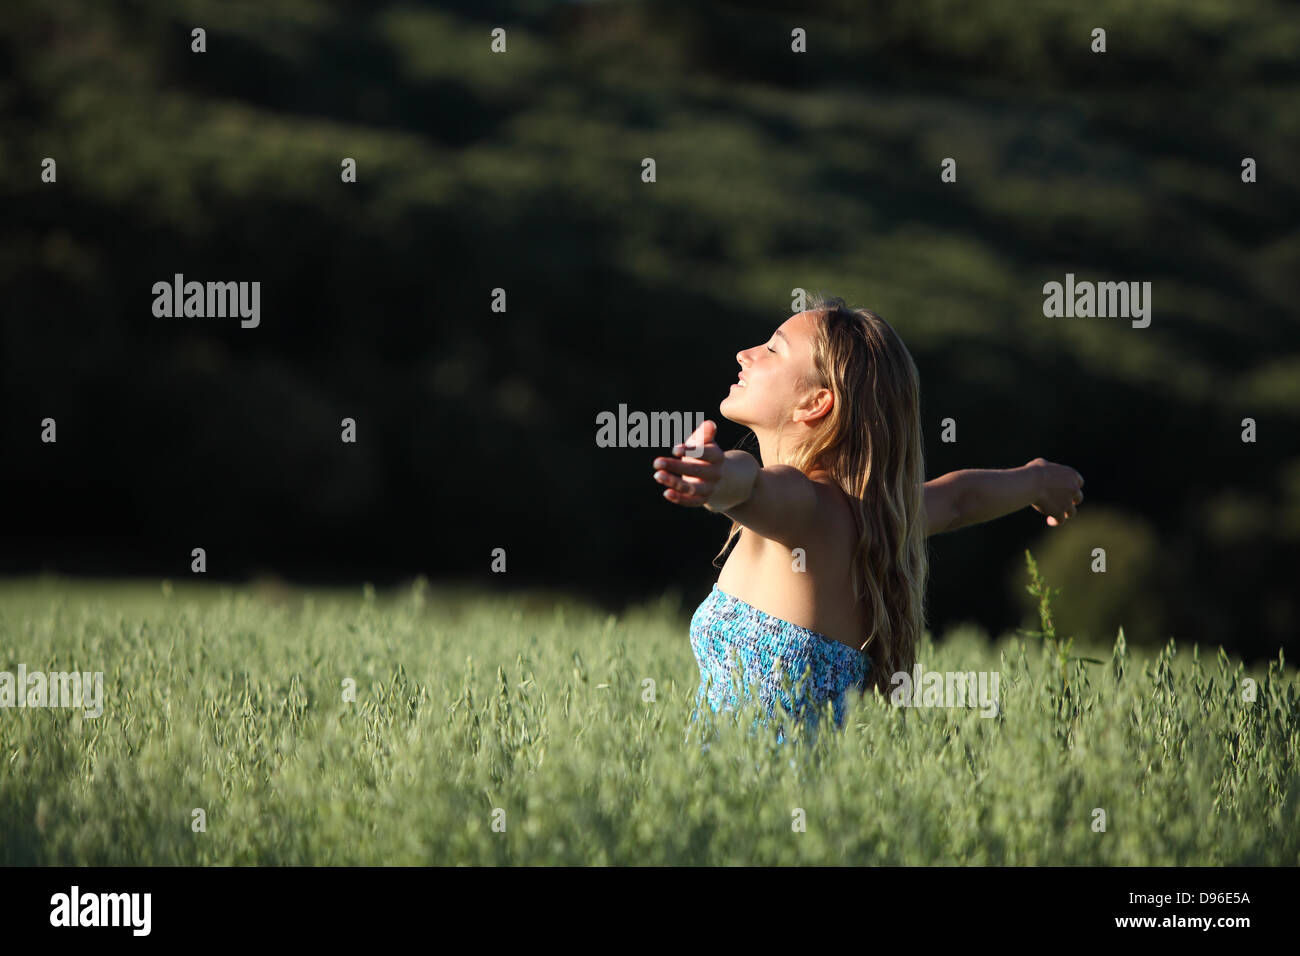 Attractive woman breathing joyful with raised arms in a green meadow with a dark background Stock Photo